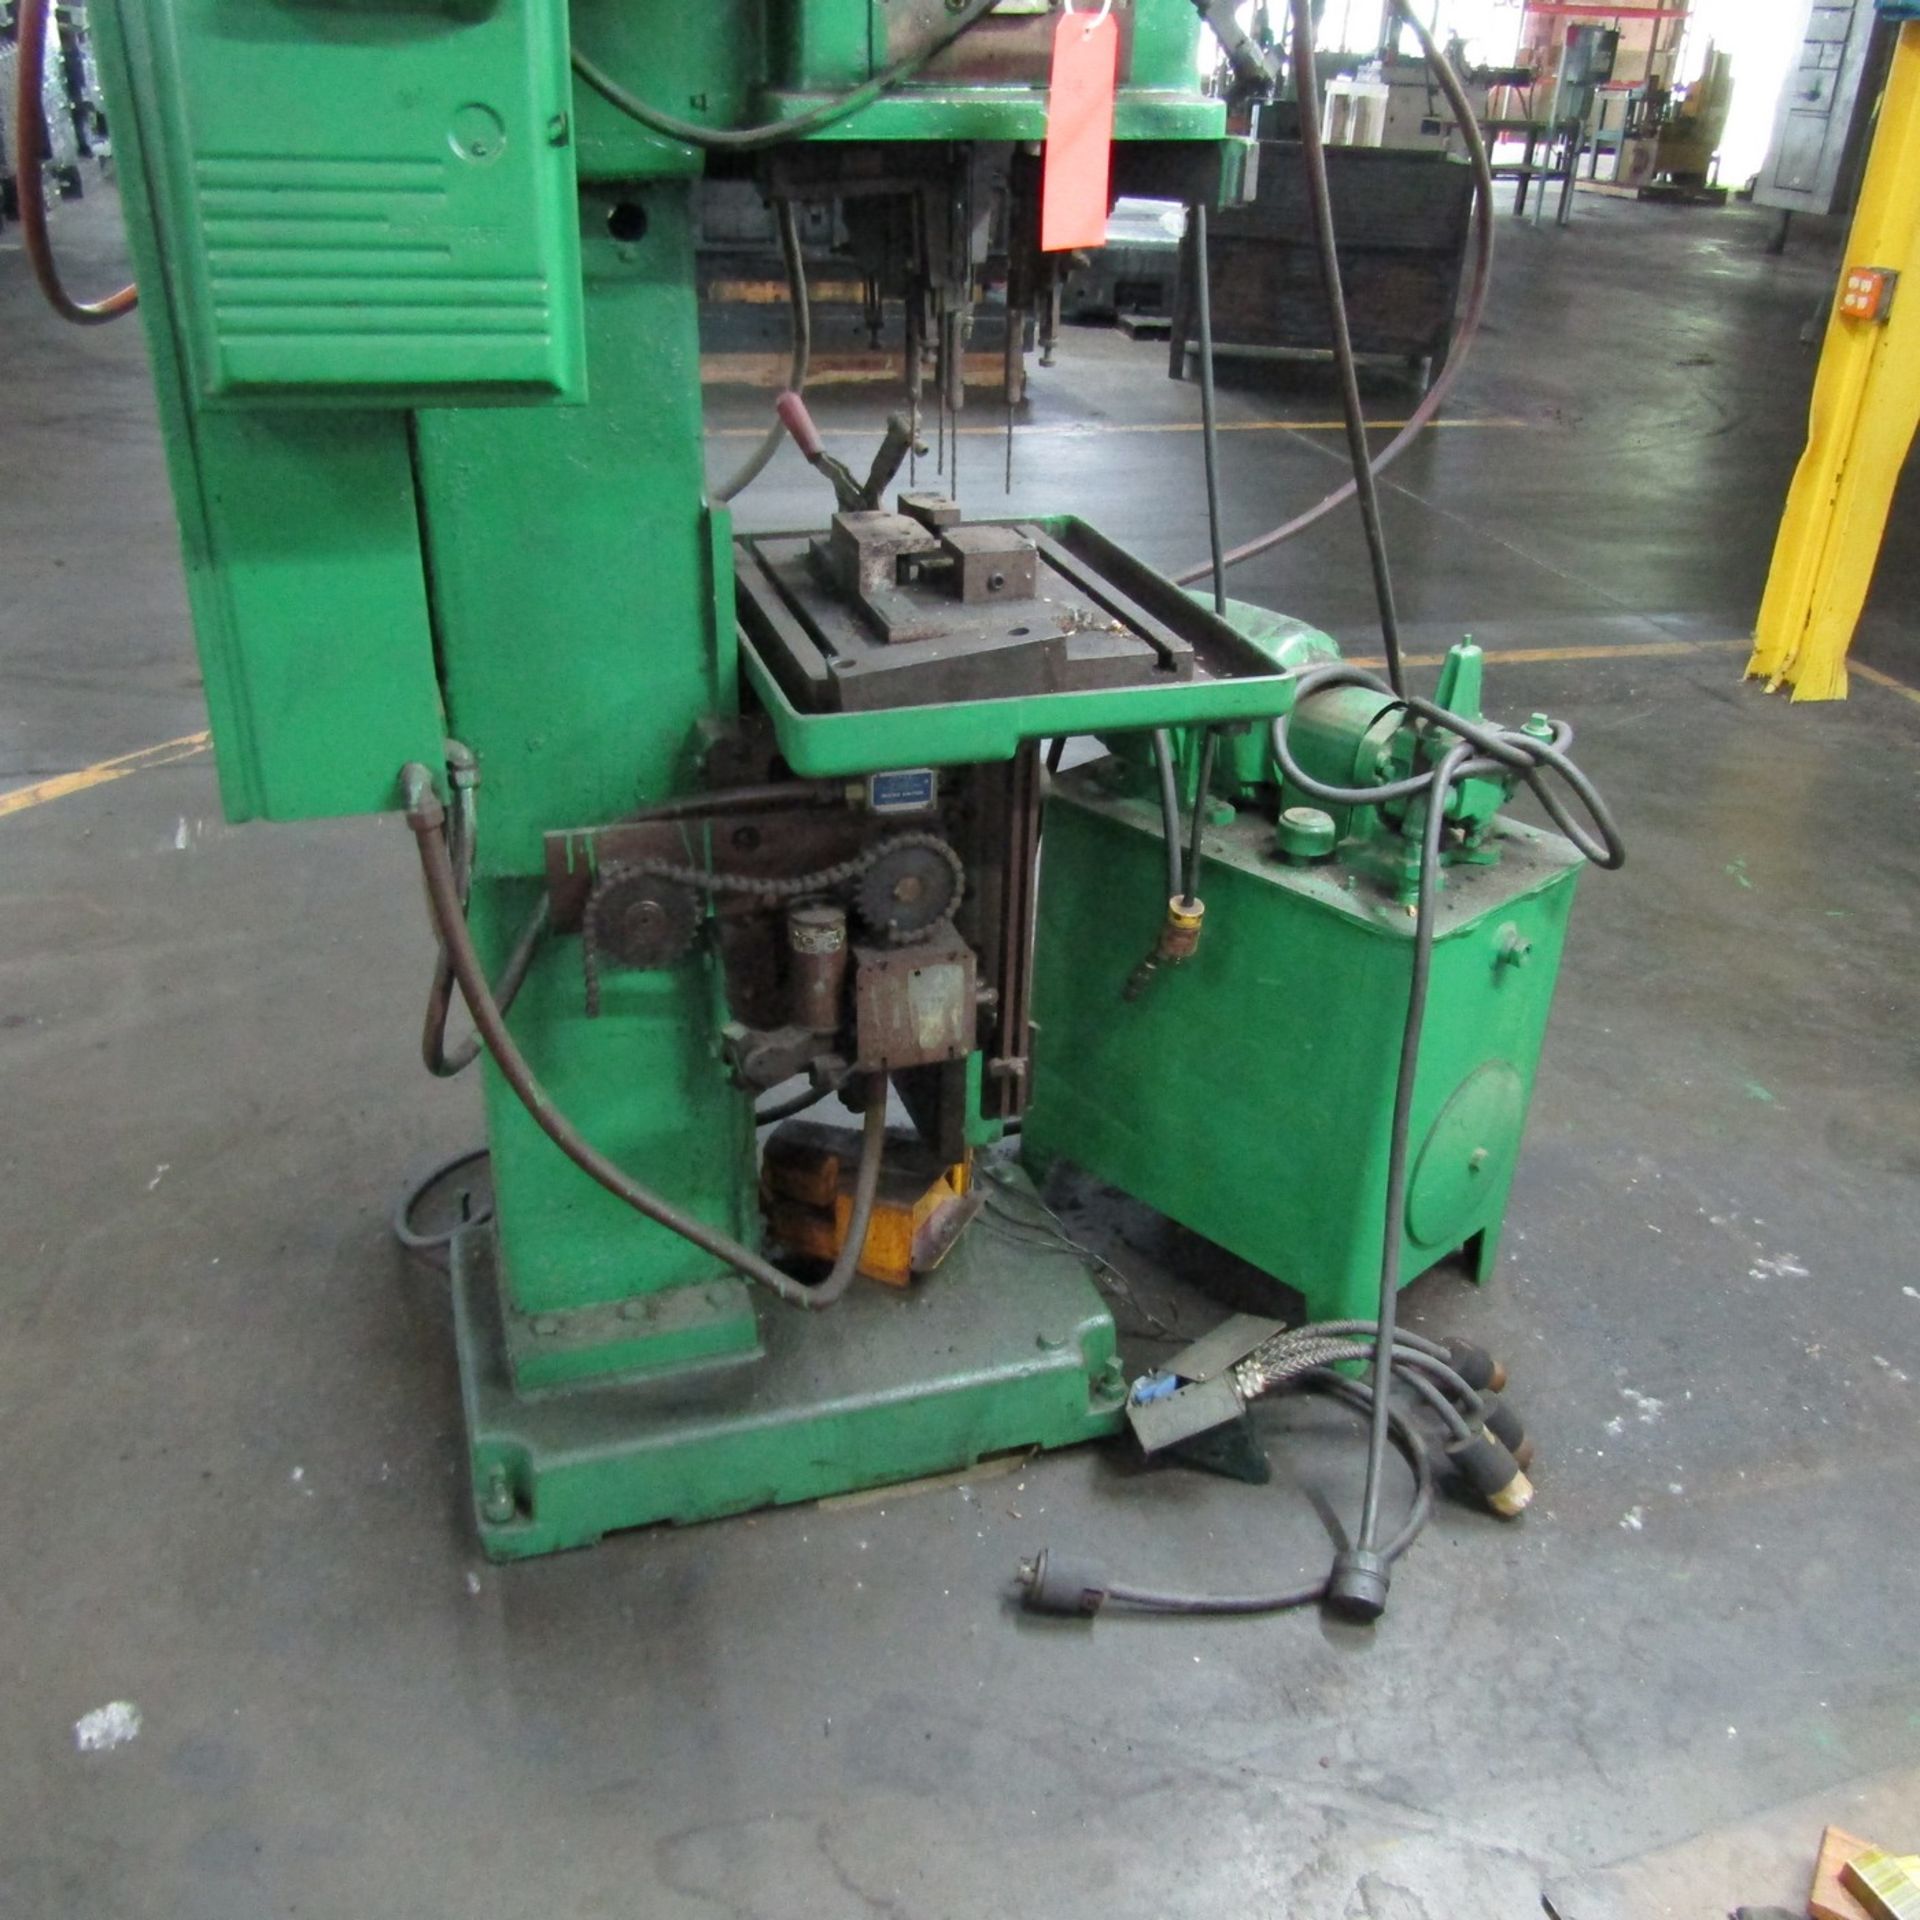 Delta Model HR-712-2 Vertical Production Drill, S/N: HRA 11862 K66; with 4-Spindle Drill Head, - Image 7 of 7